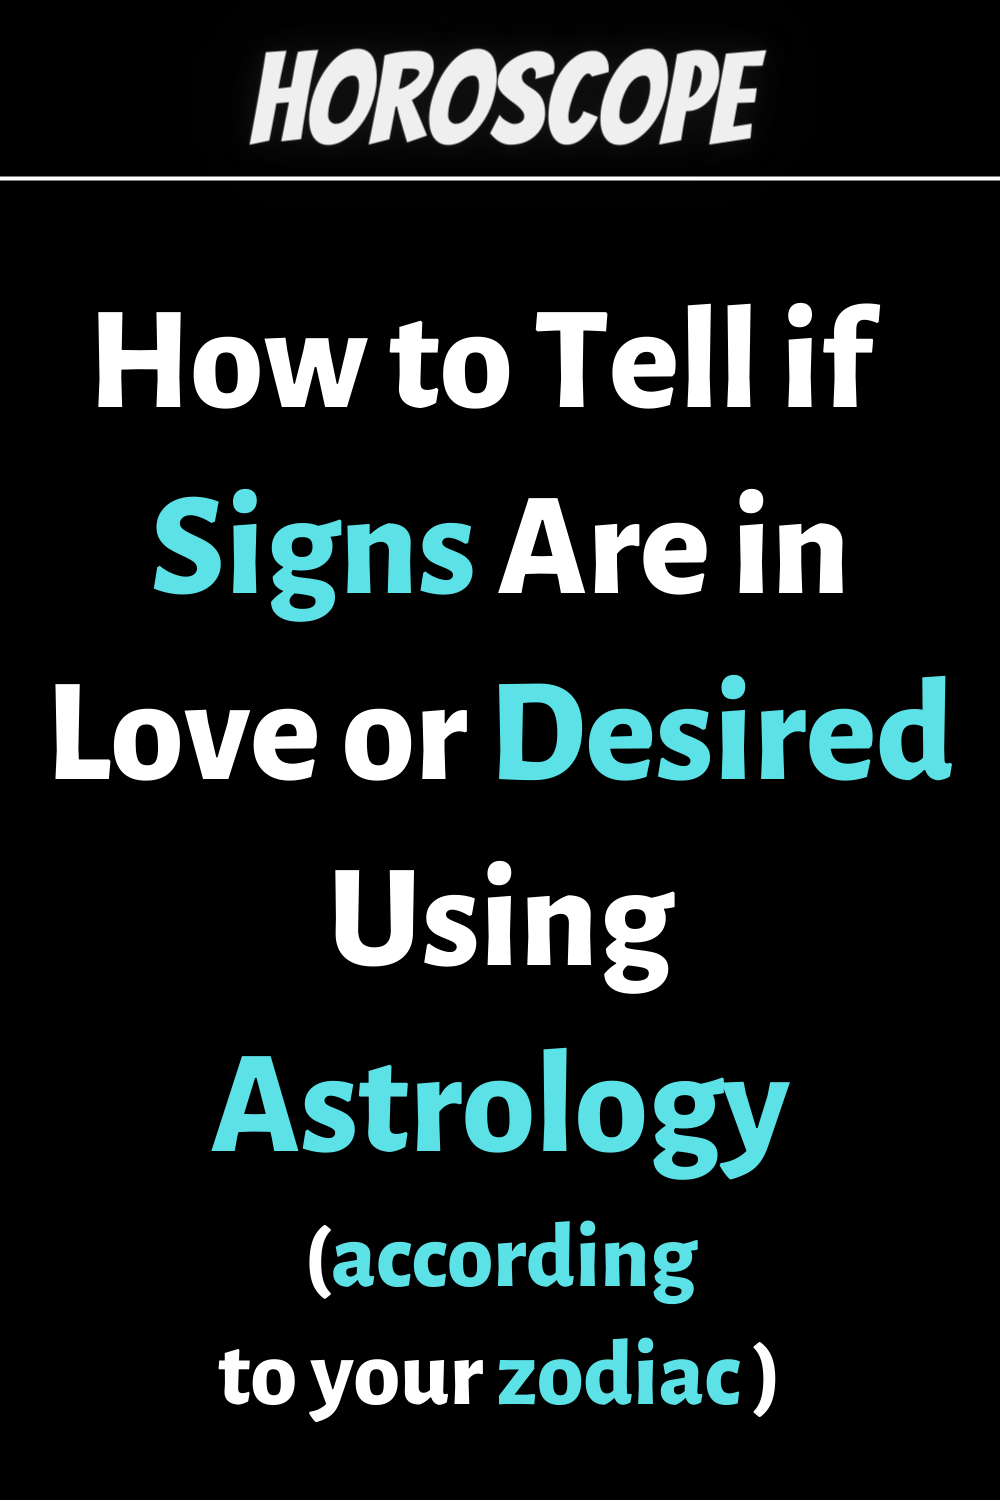 How to Tell if Zodiac Signs Are in Love or Desired Using Astrology